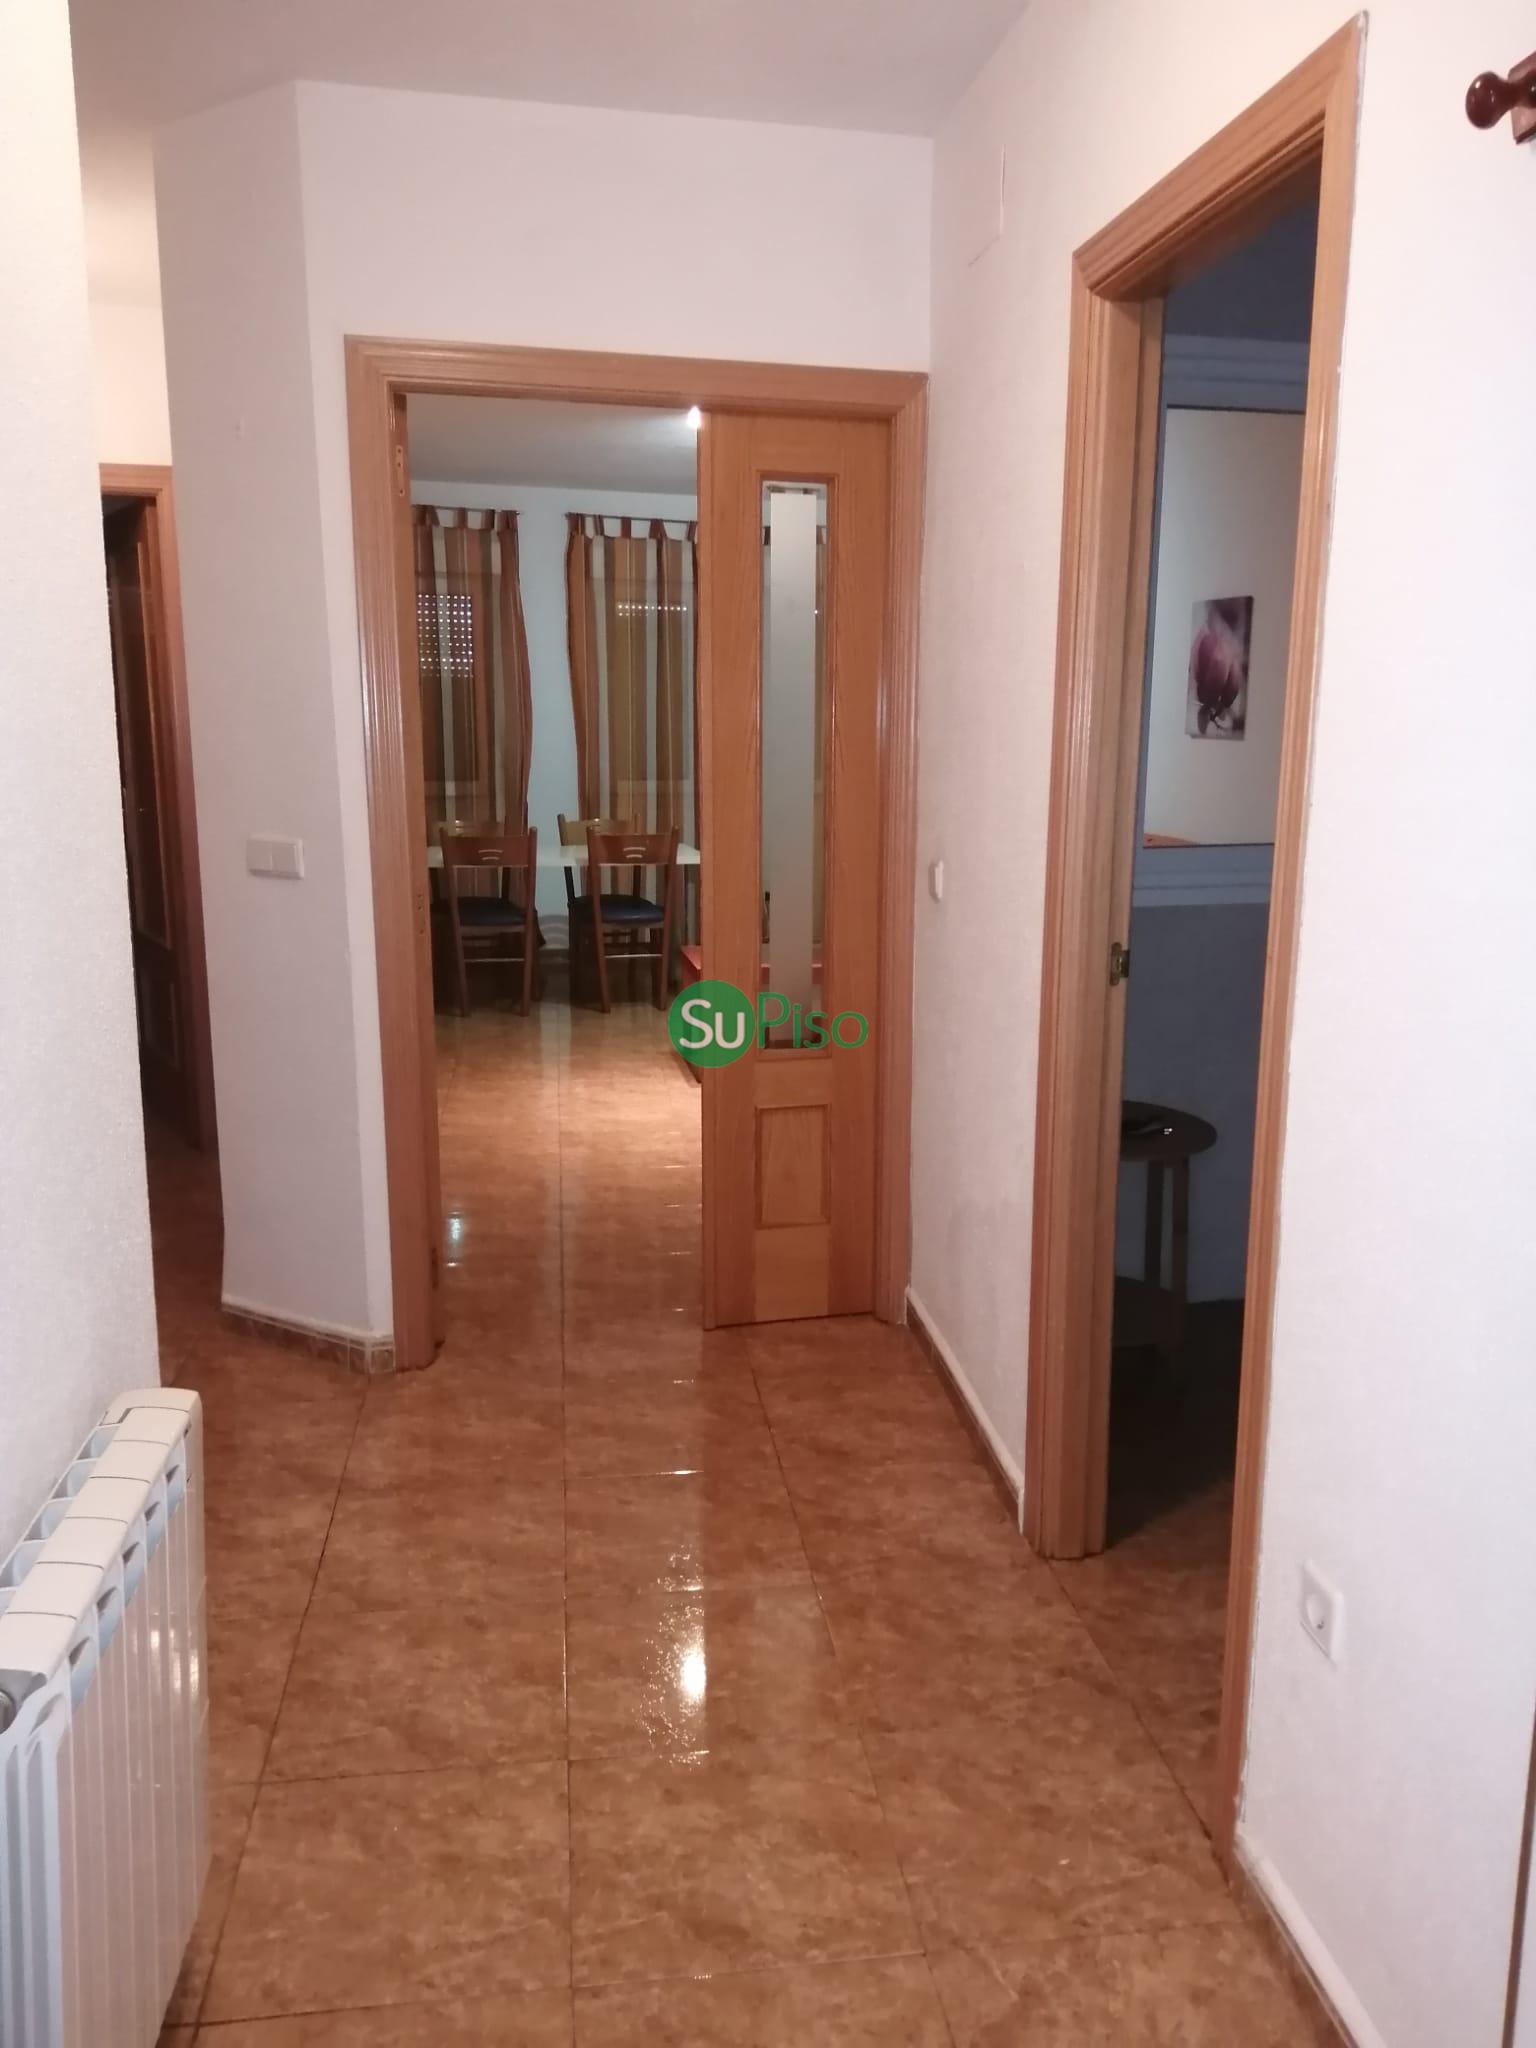 For sale of flat in Borox